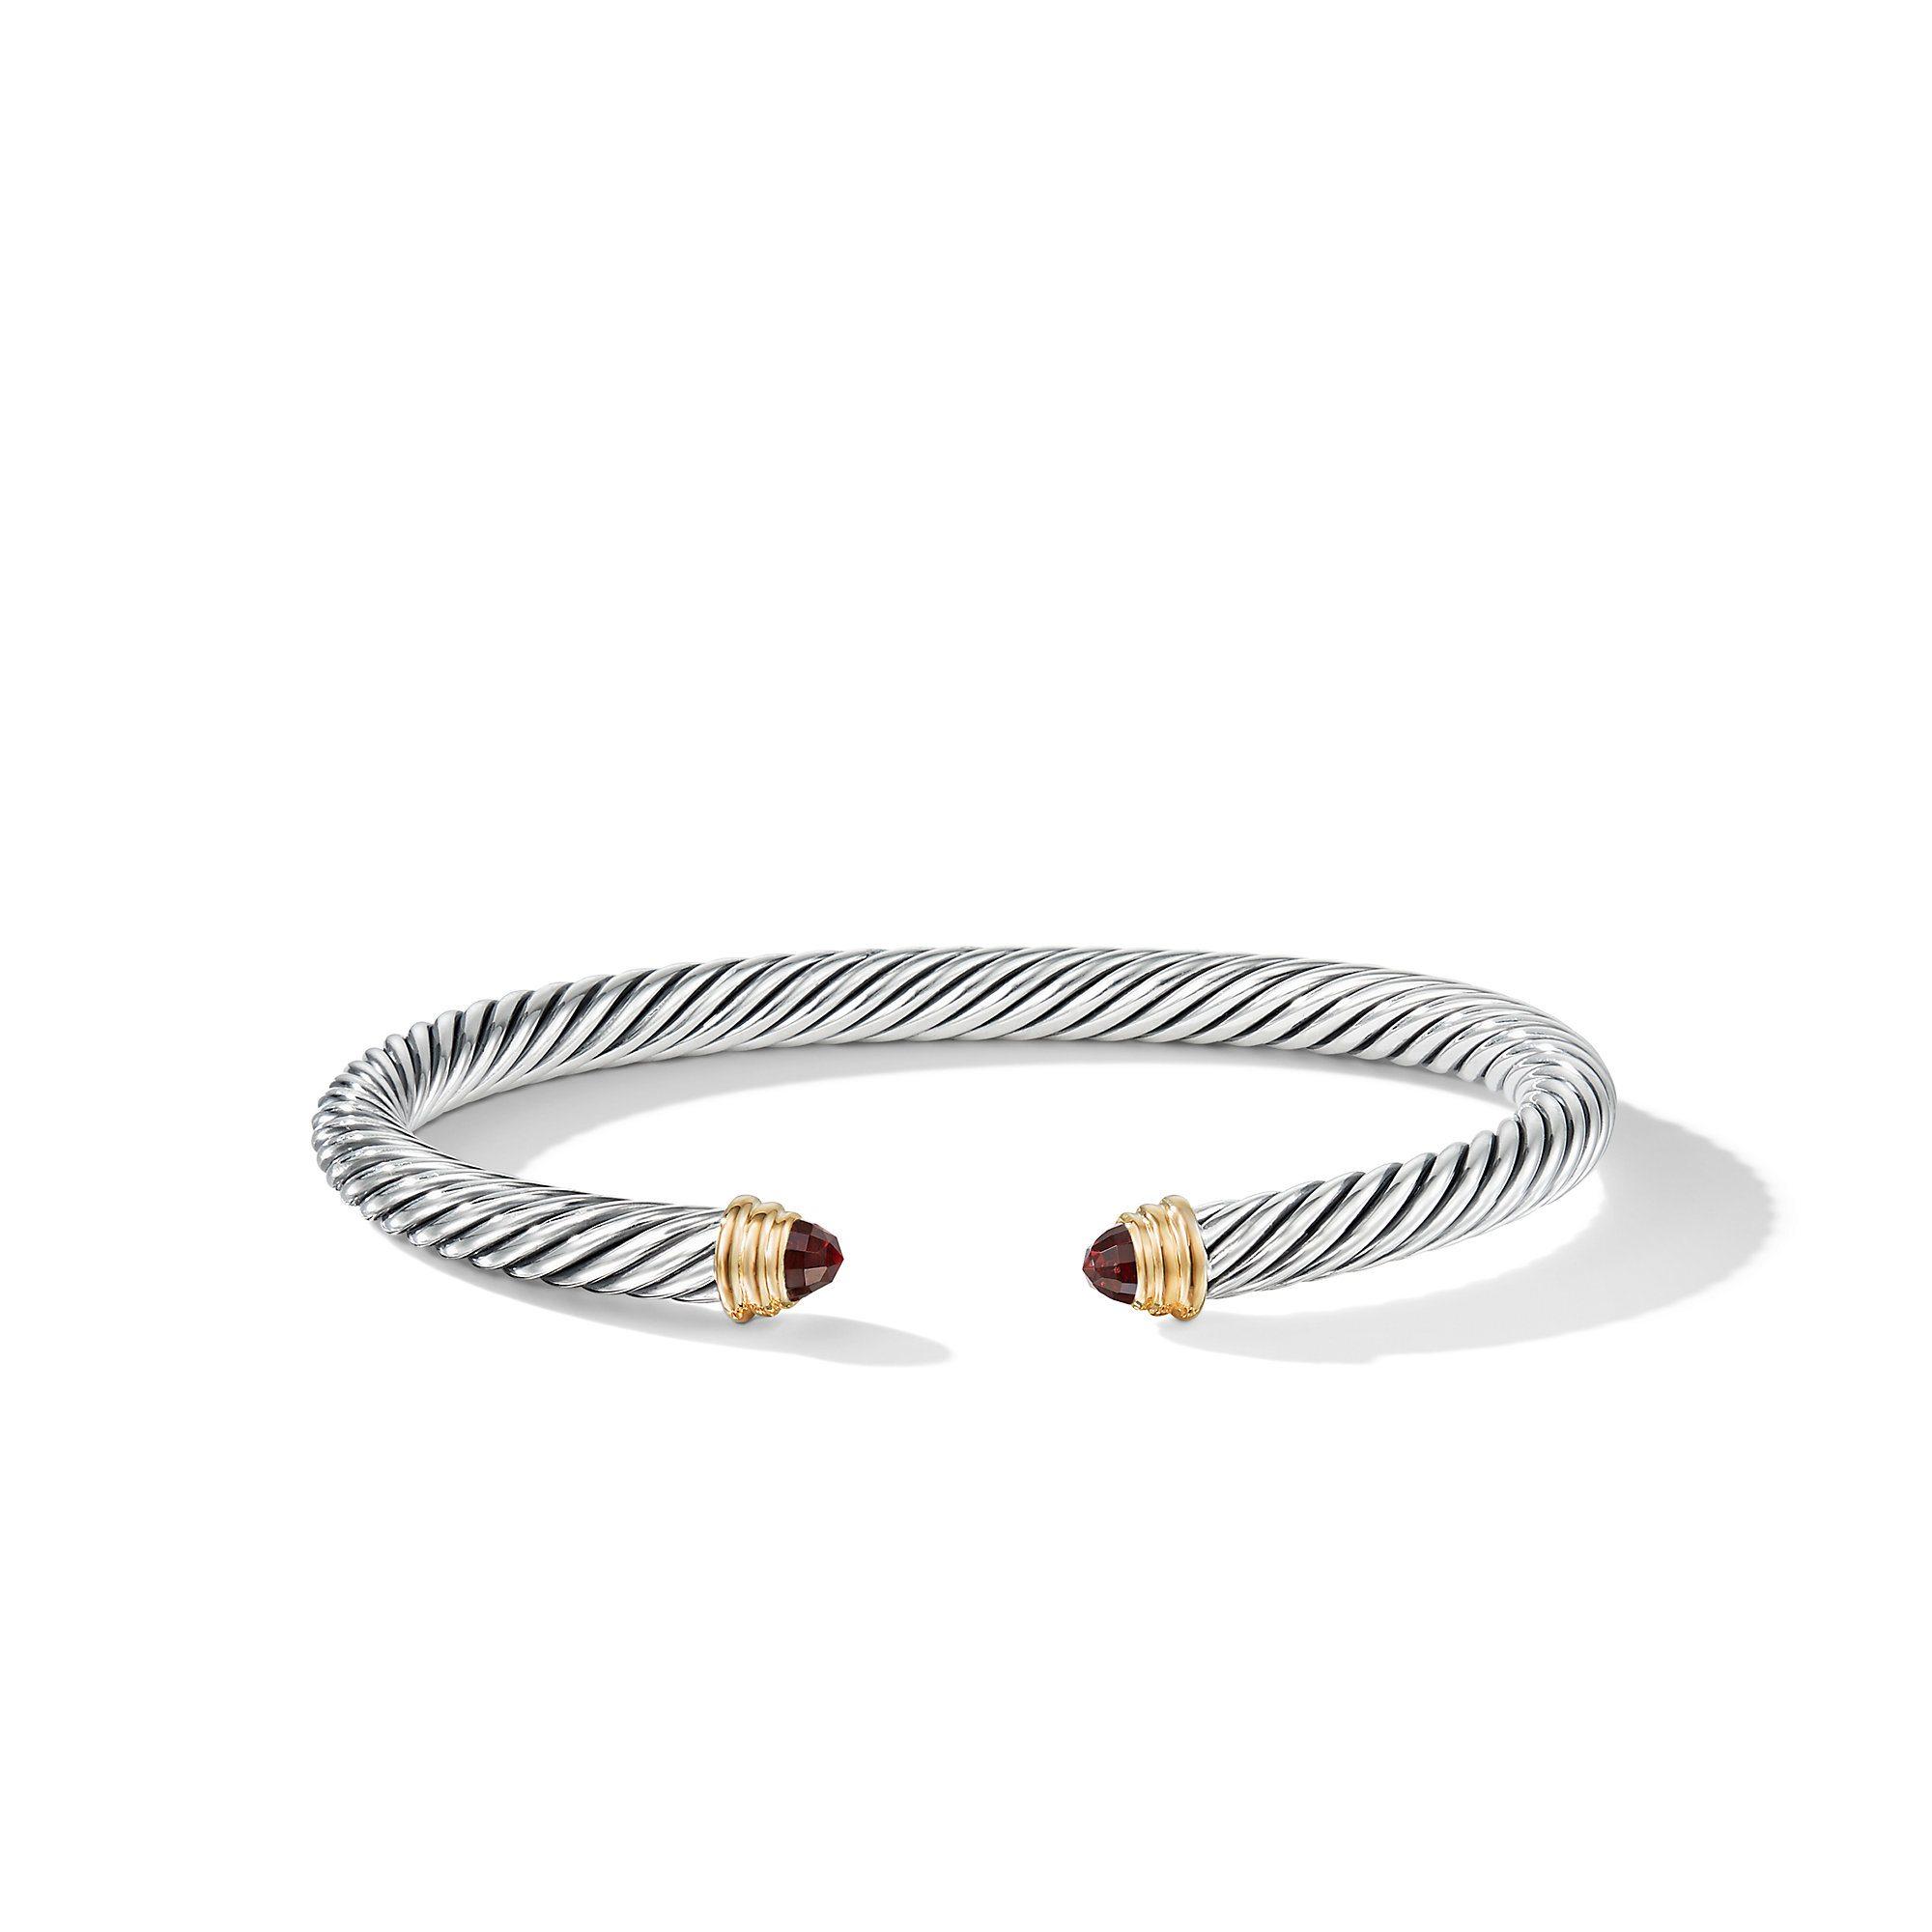 David Yurman 5mm Classic Cable Bracelet in Sterling Silver with Yellow Gold and Garnets